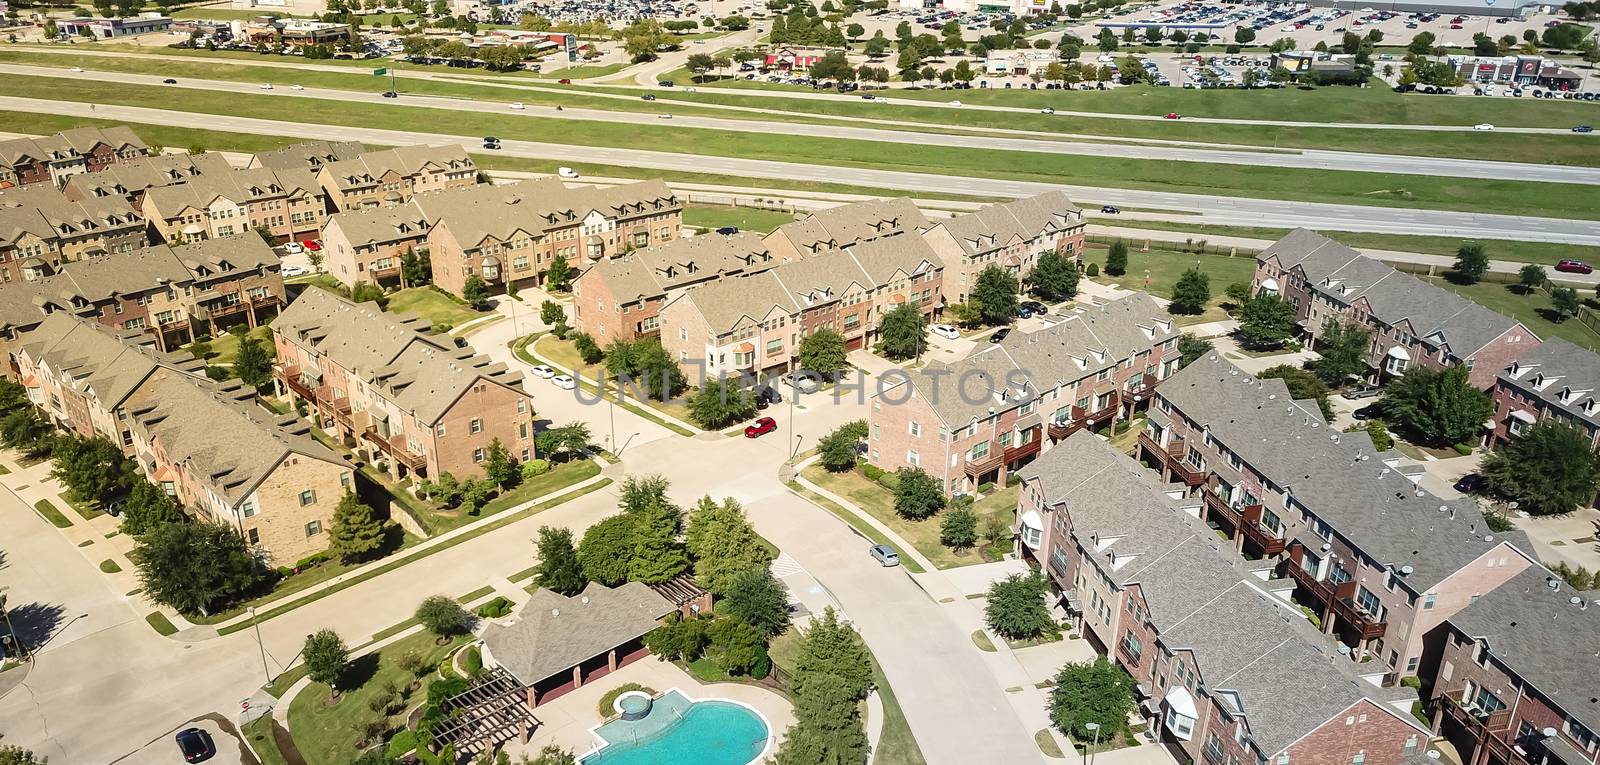 Panorama top view apartment complex near highway 635 and strip mall, marketplace suburban Dallas, Texas. Multistory rental building with swimming pool and attached garages